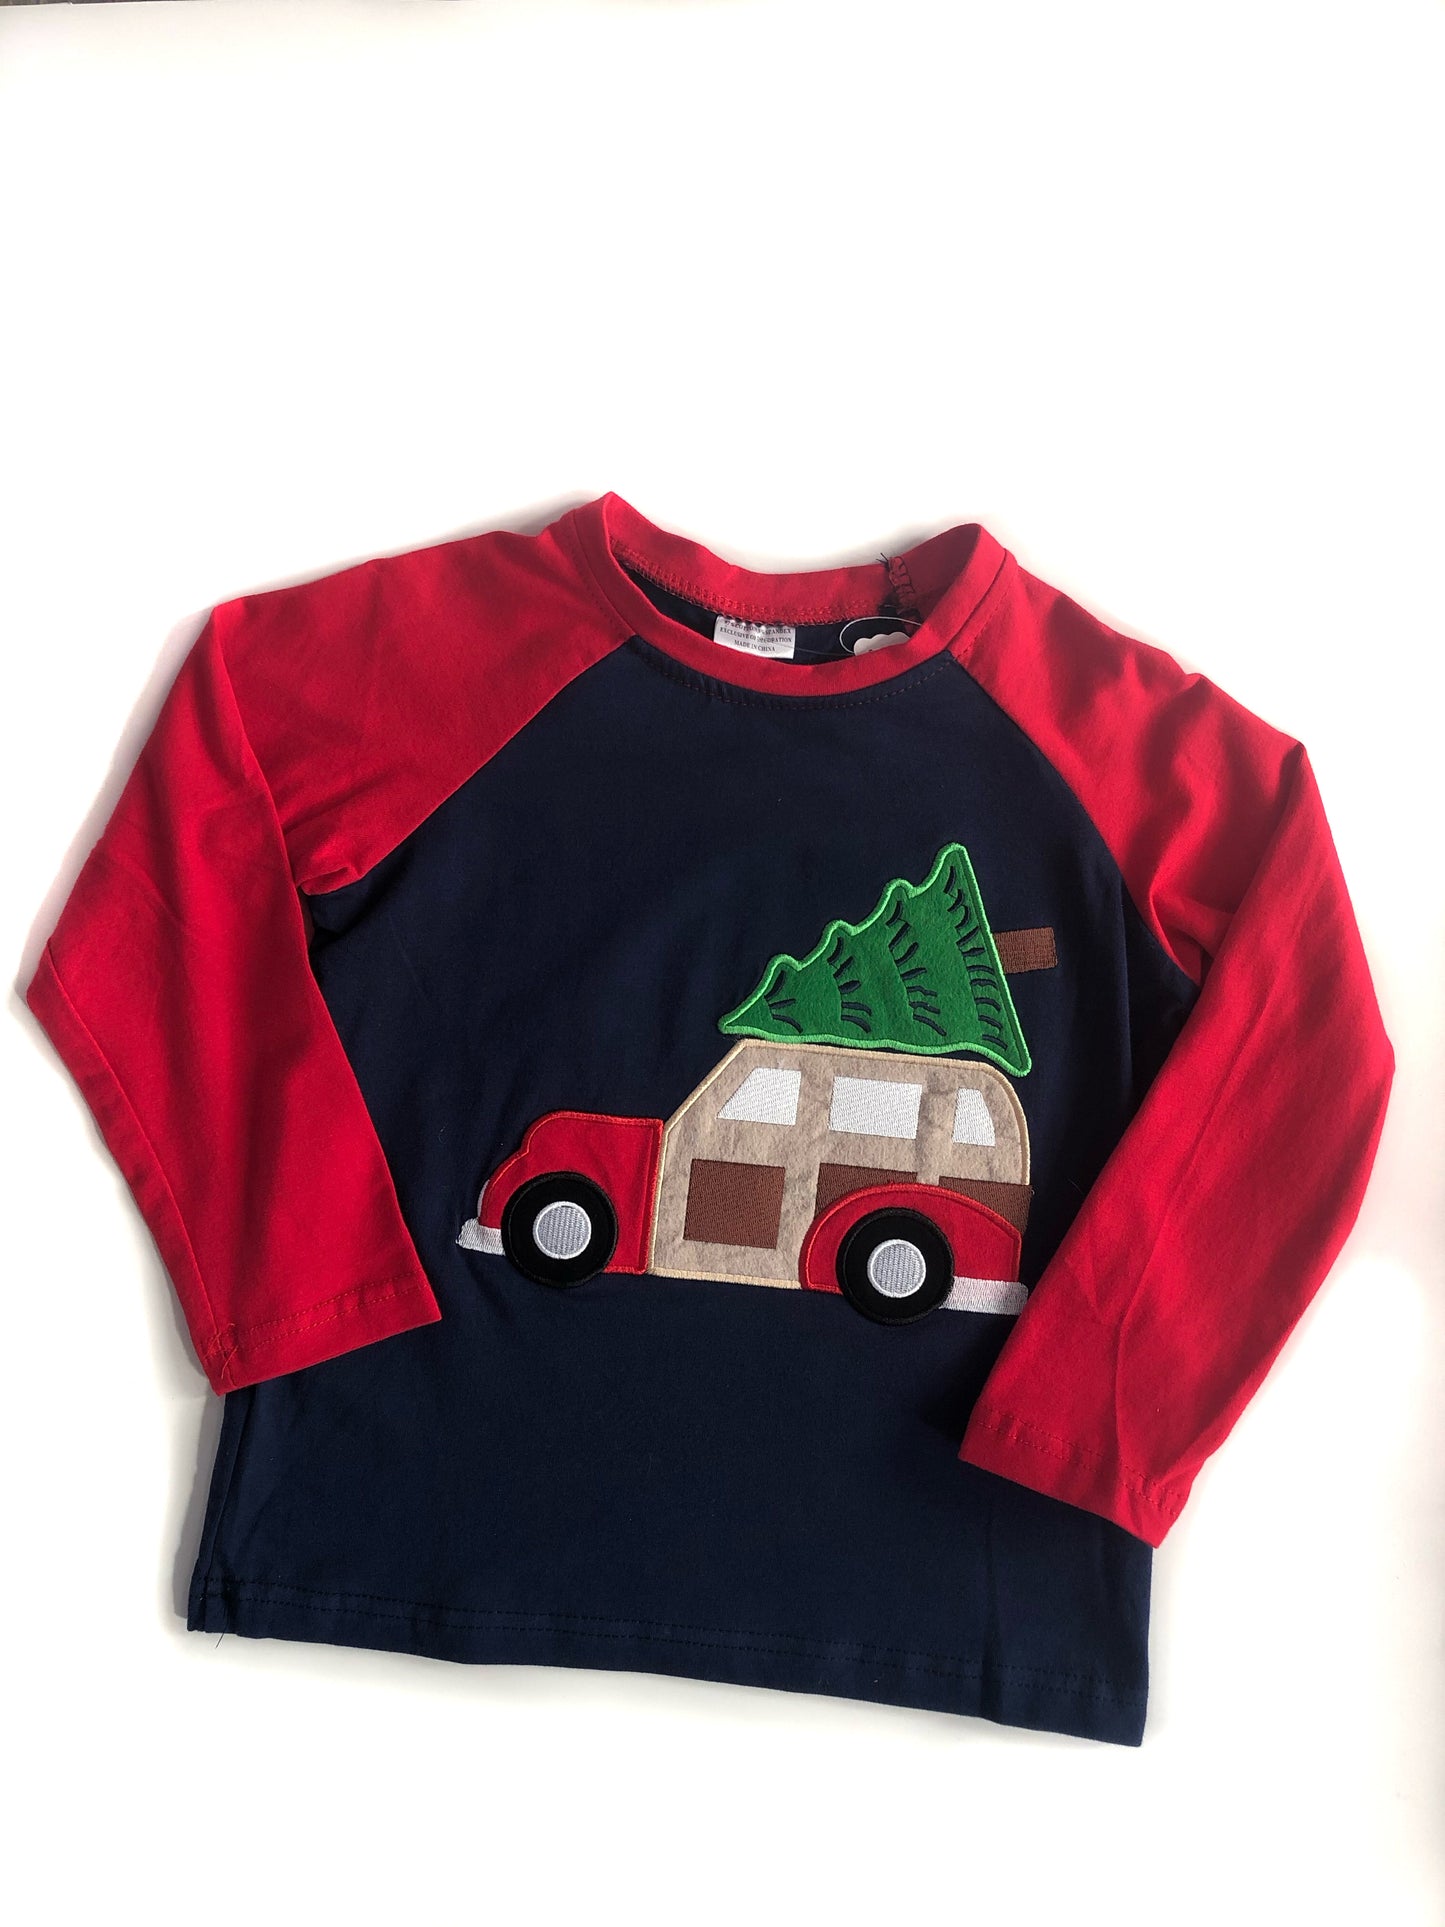 The Griswold Tee